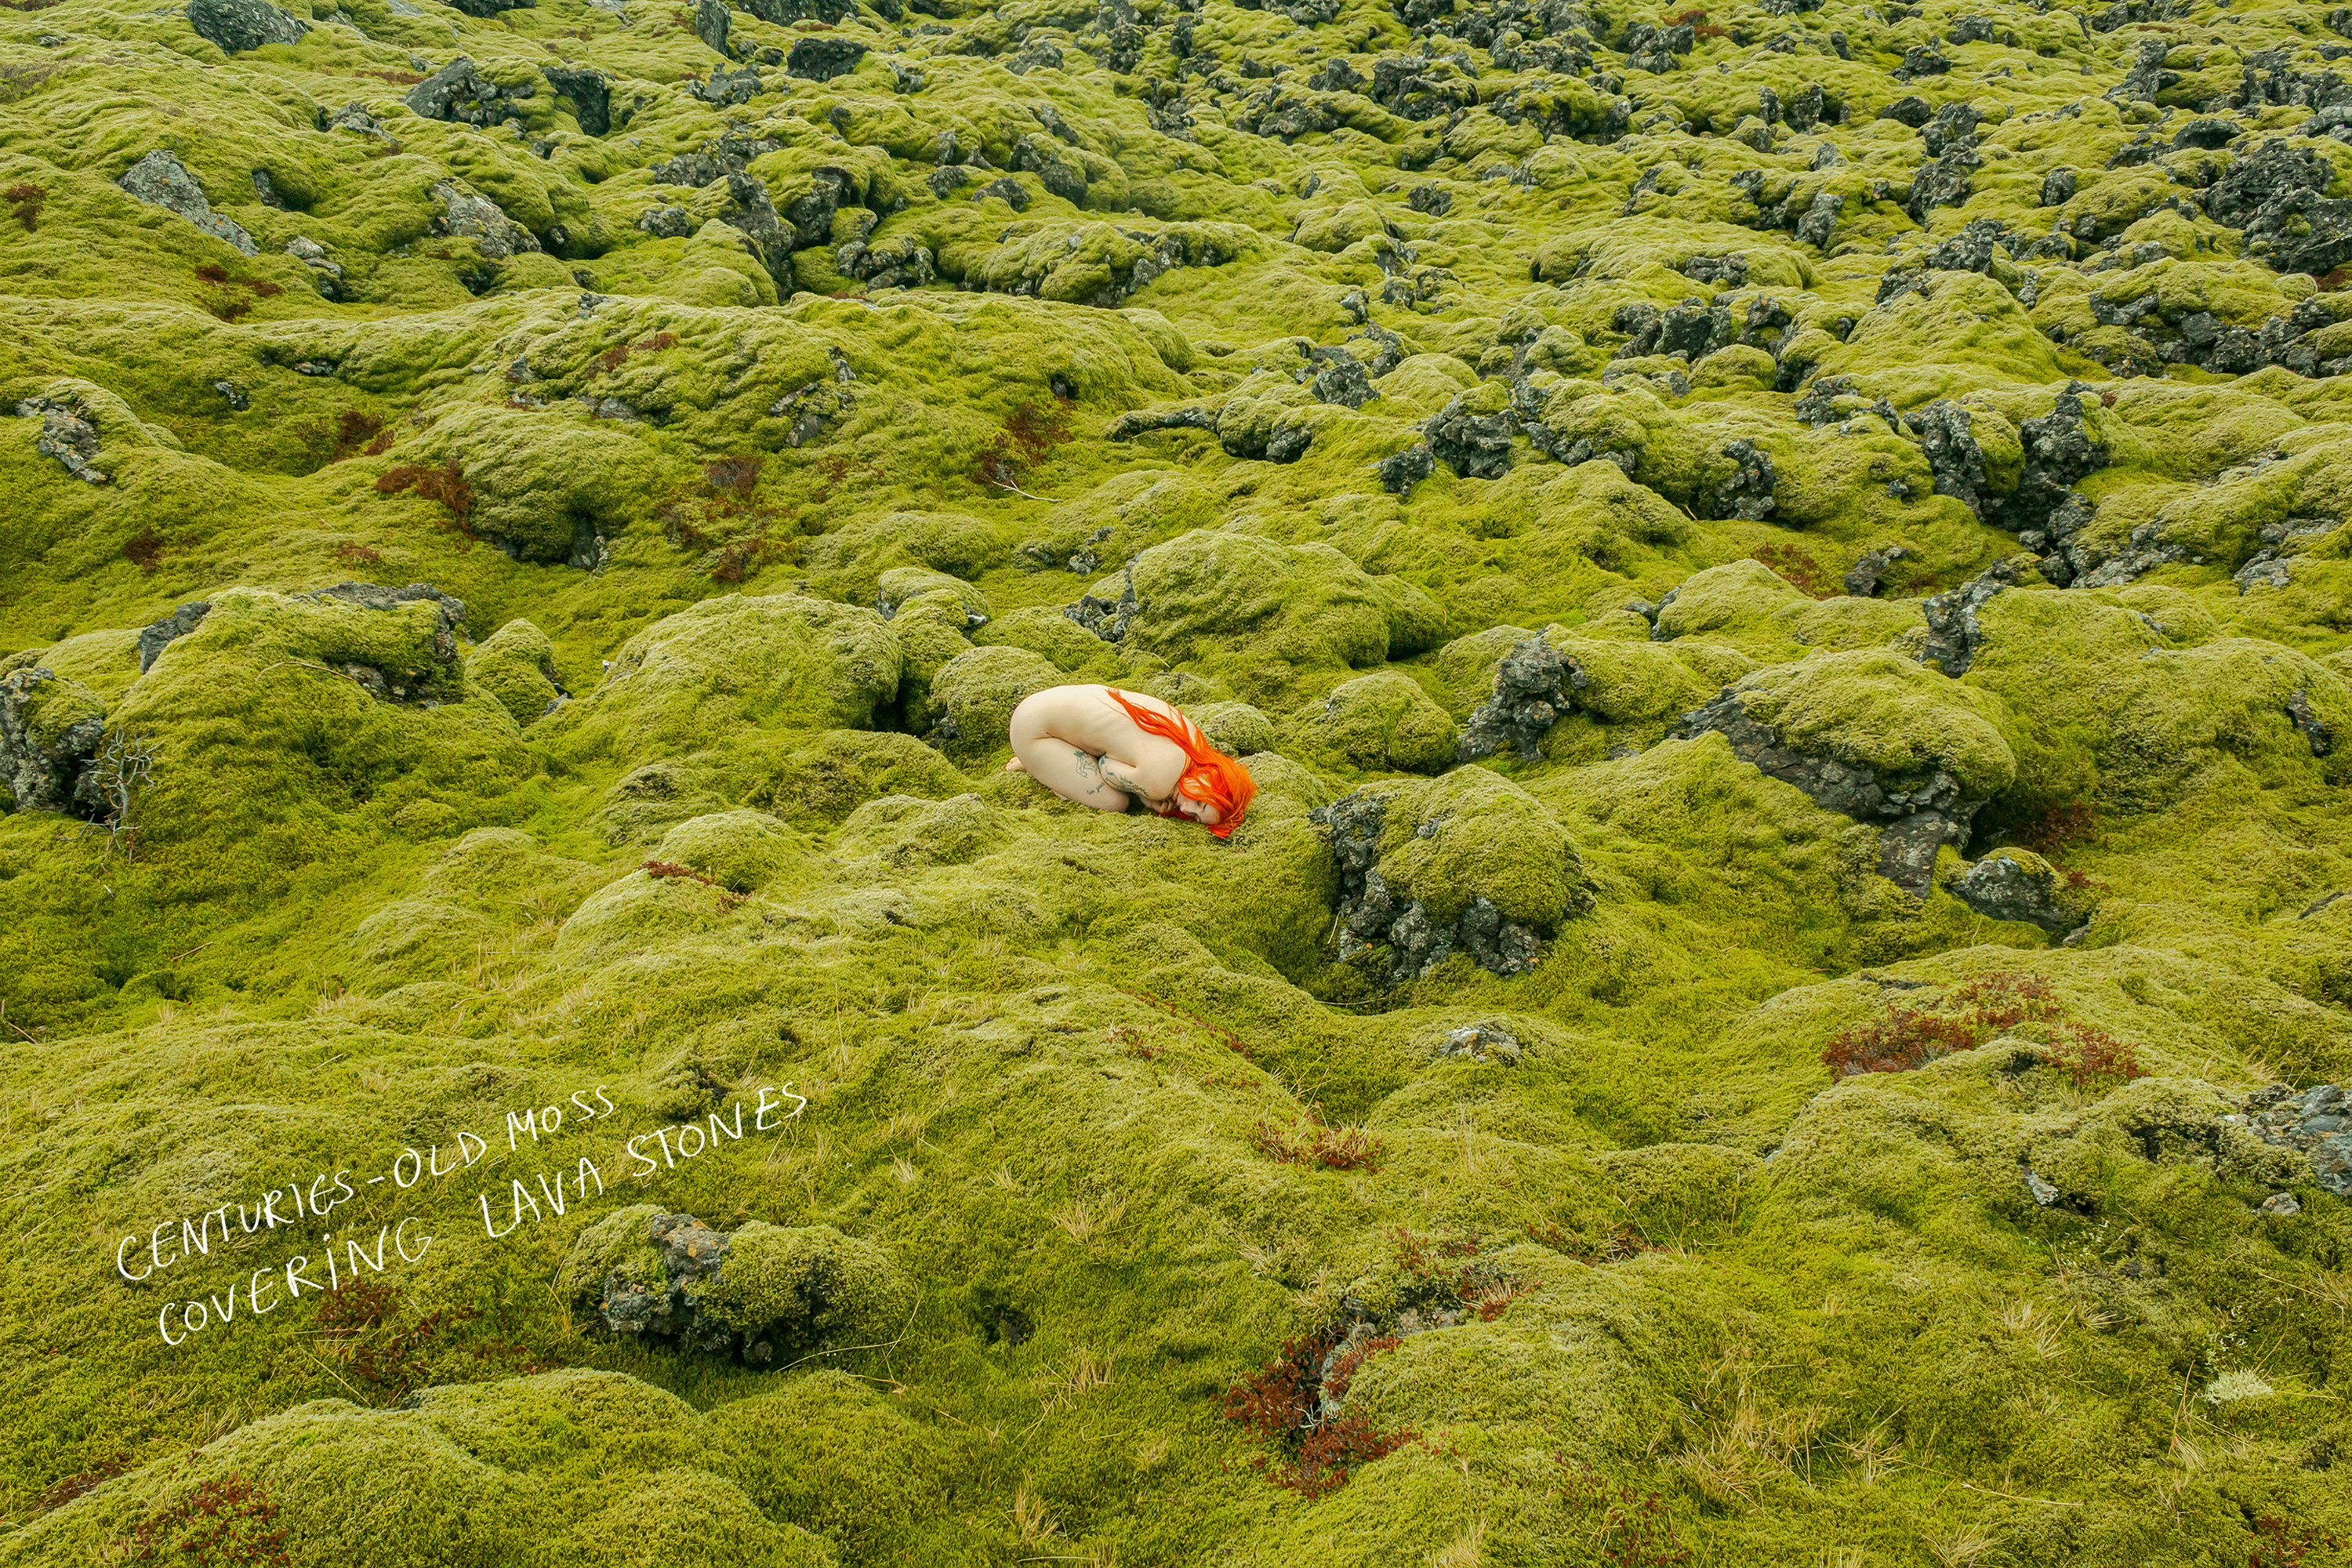 The artist nude outside in fetal position on a moss covered rock landscape with the text on the image reading, &quot;centuries old moss covering lava stones&quot; 